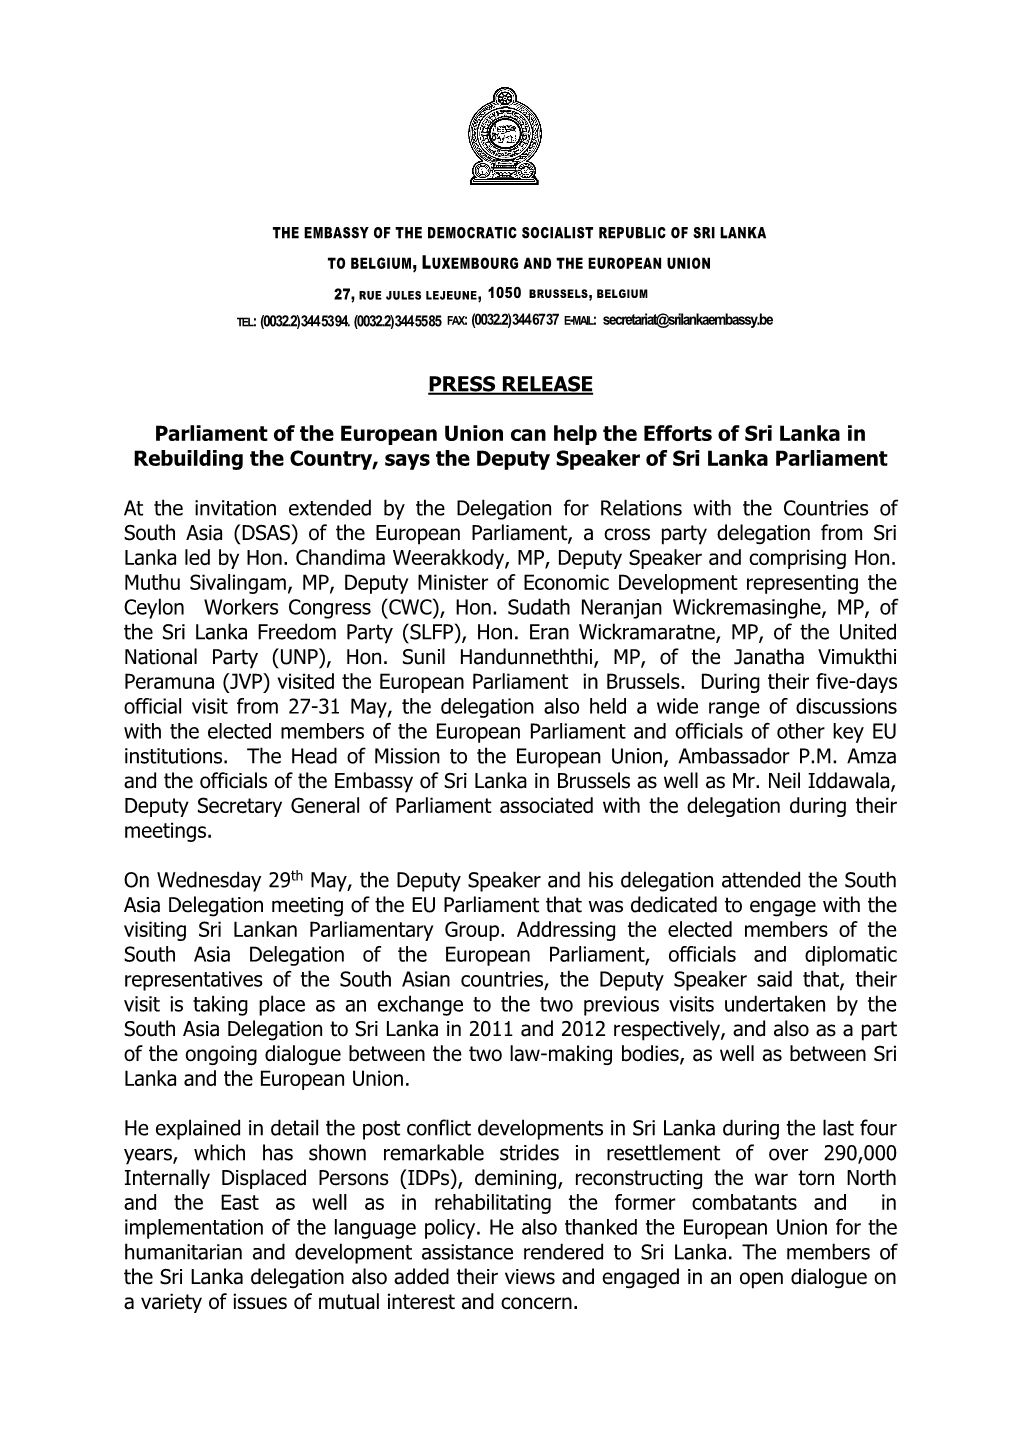 PRESS RELEASE Parliament of the European Union Can Help the Efforts of Sri Lanka in Rebuilding the Country, Says the Deputy Spea